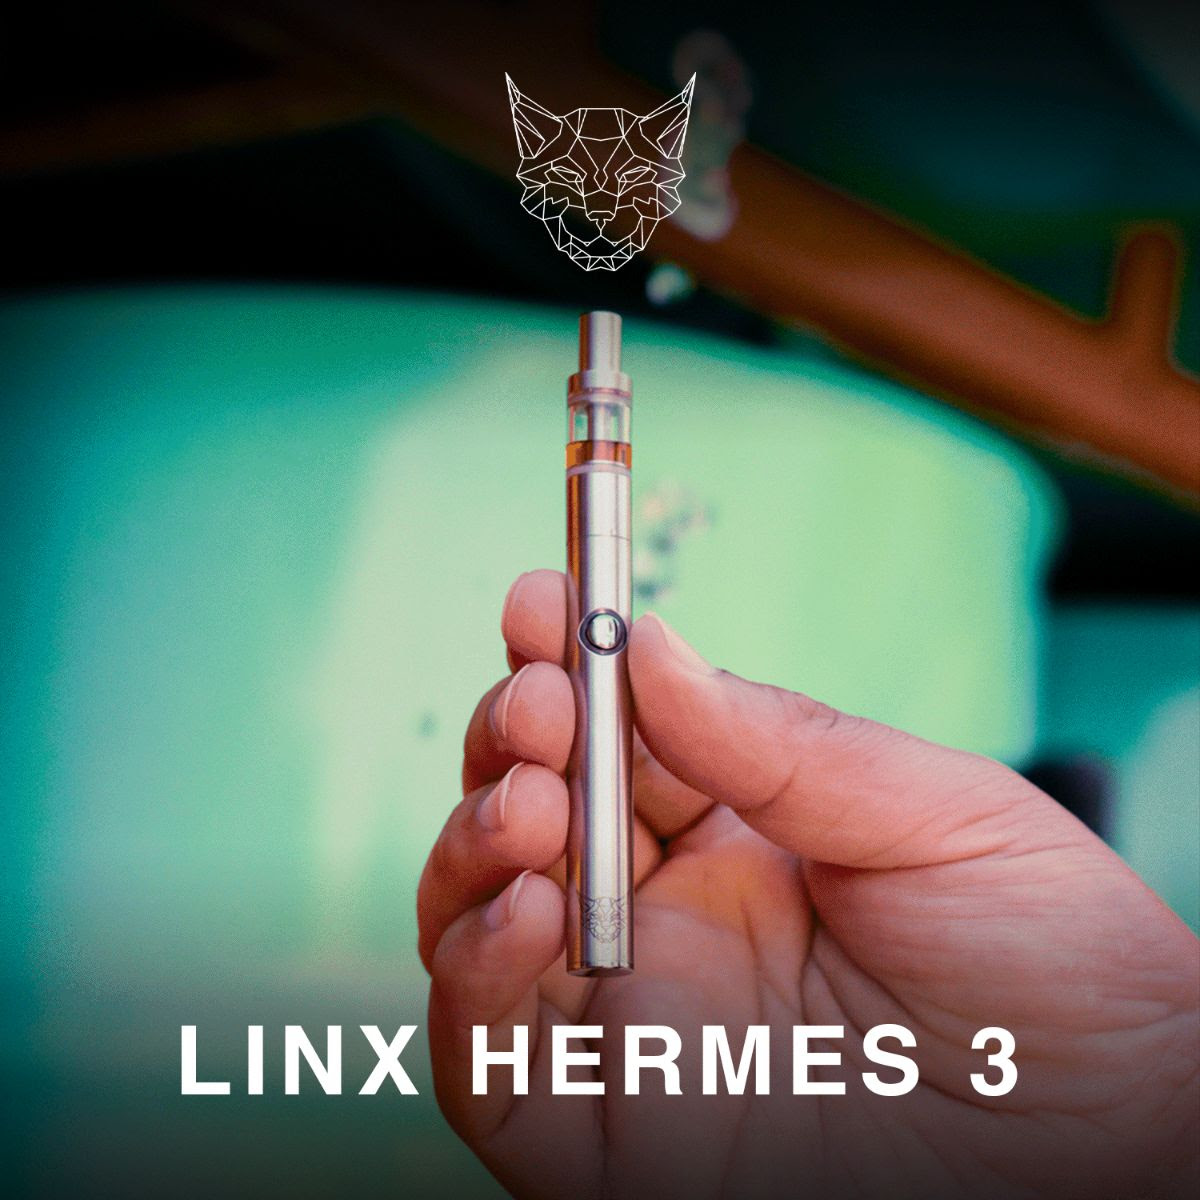 Linx Hermes 3 Review: Great Hits, but High Cost - MOSCA SEEDS